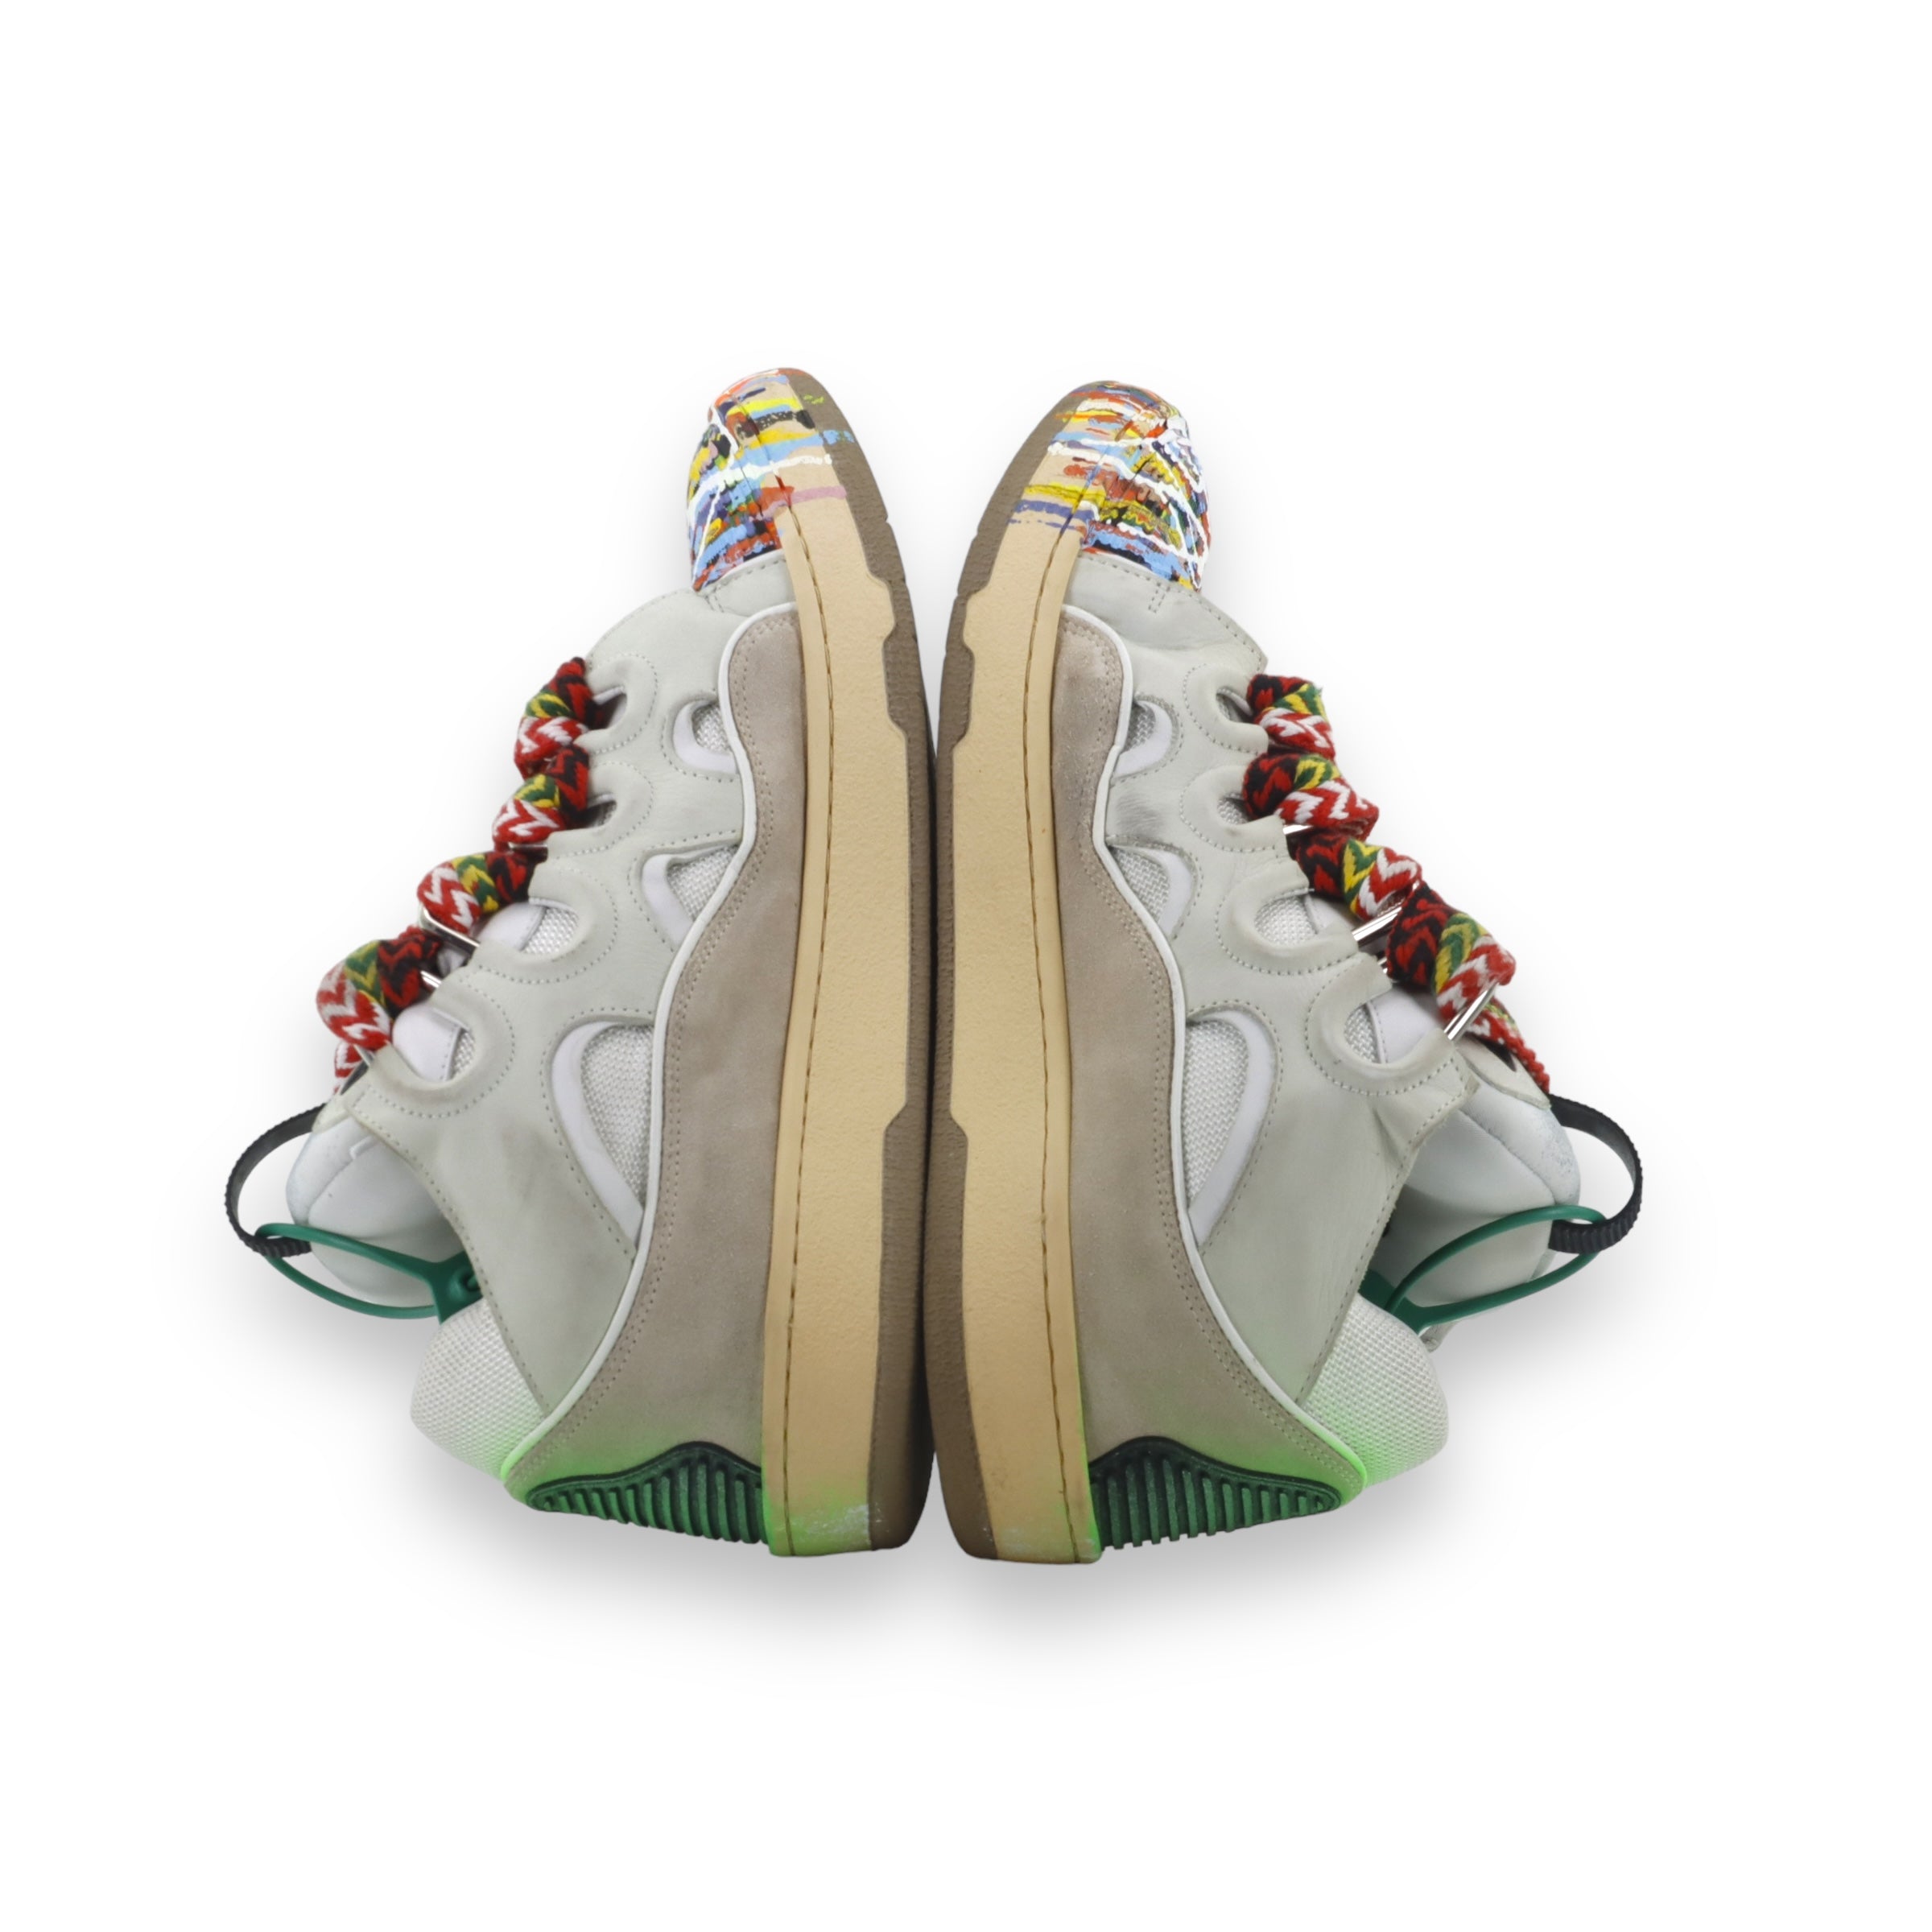 Gallery Dept. x Lanvin Painted Curb Sneakers